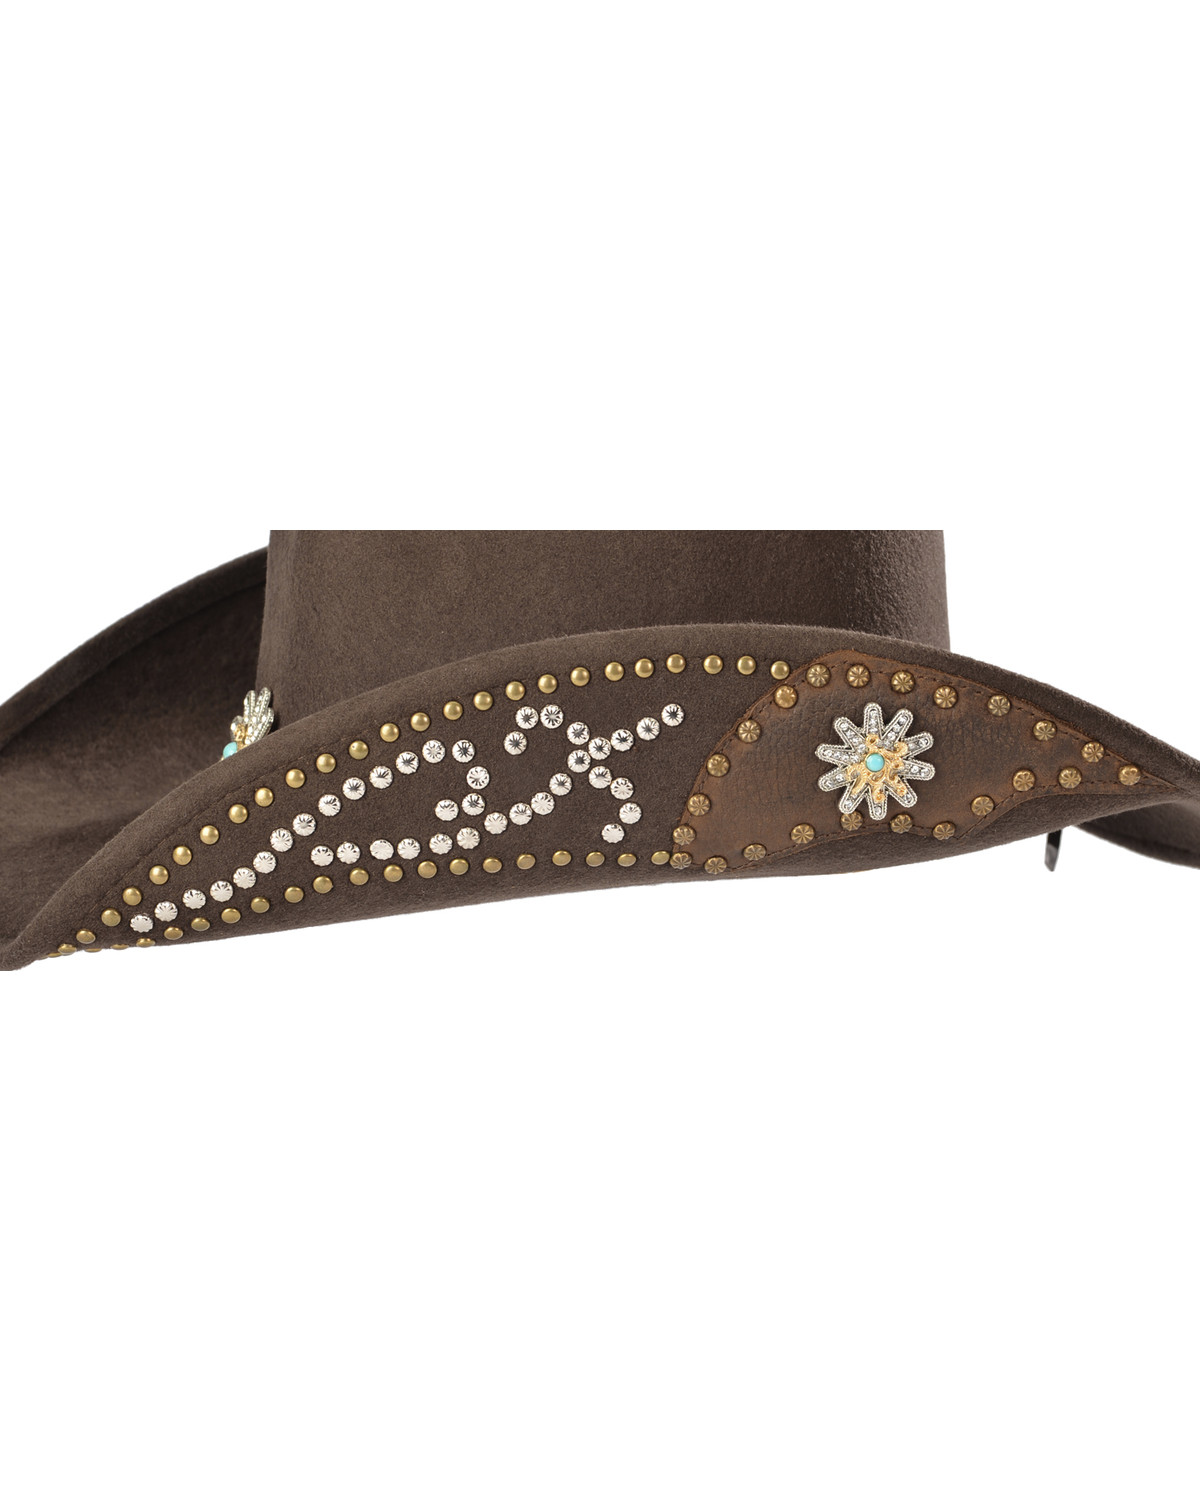 Bullhide Hats Womens Your Everything Embellished Felt Cowgirl Hat